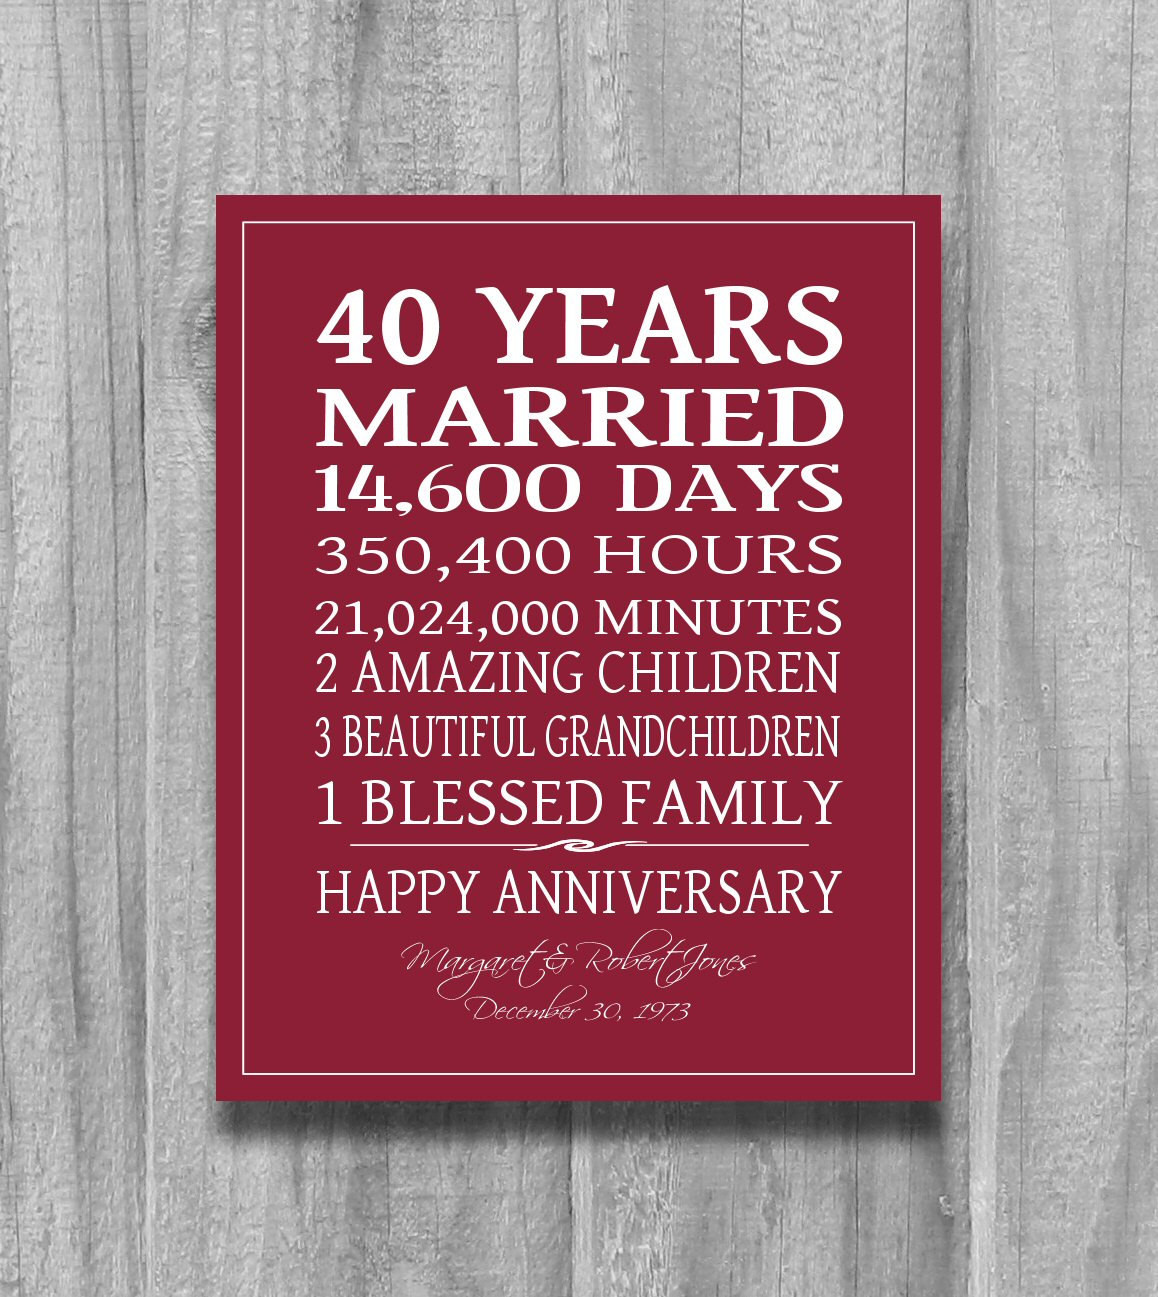 40Th Anniversary Gift Ideas For Couples
 RUBY 4Oth Anniversary Gift Personalized by PrintsbyChristine